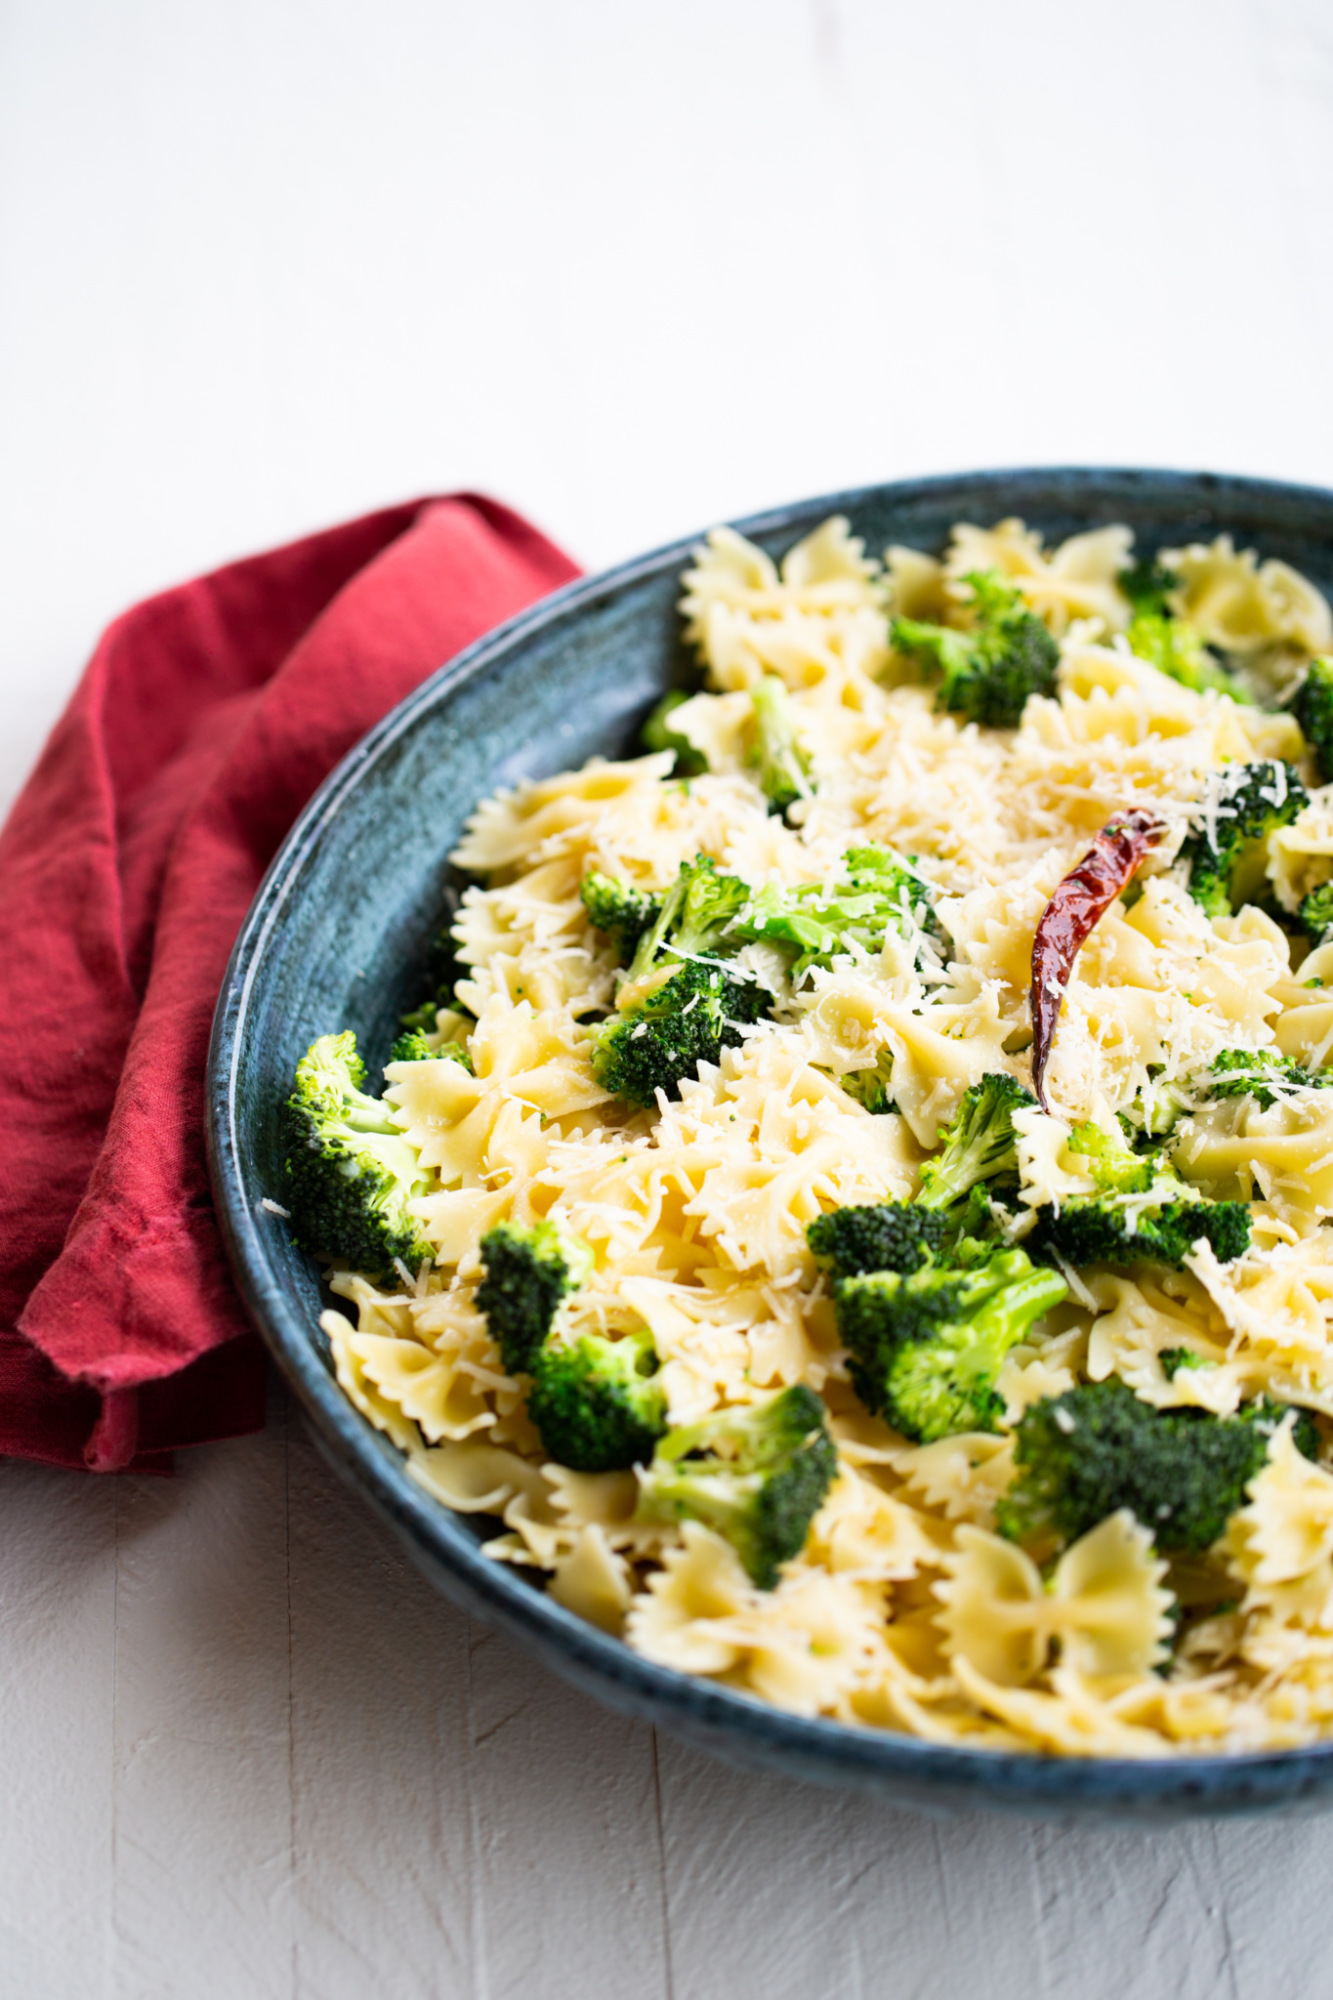 EASY ONE POT PASTA WITH BROCCOLI
